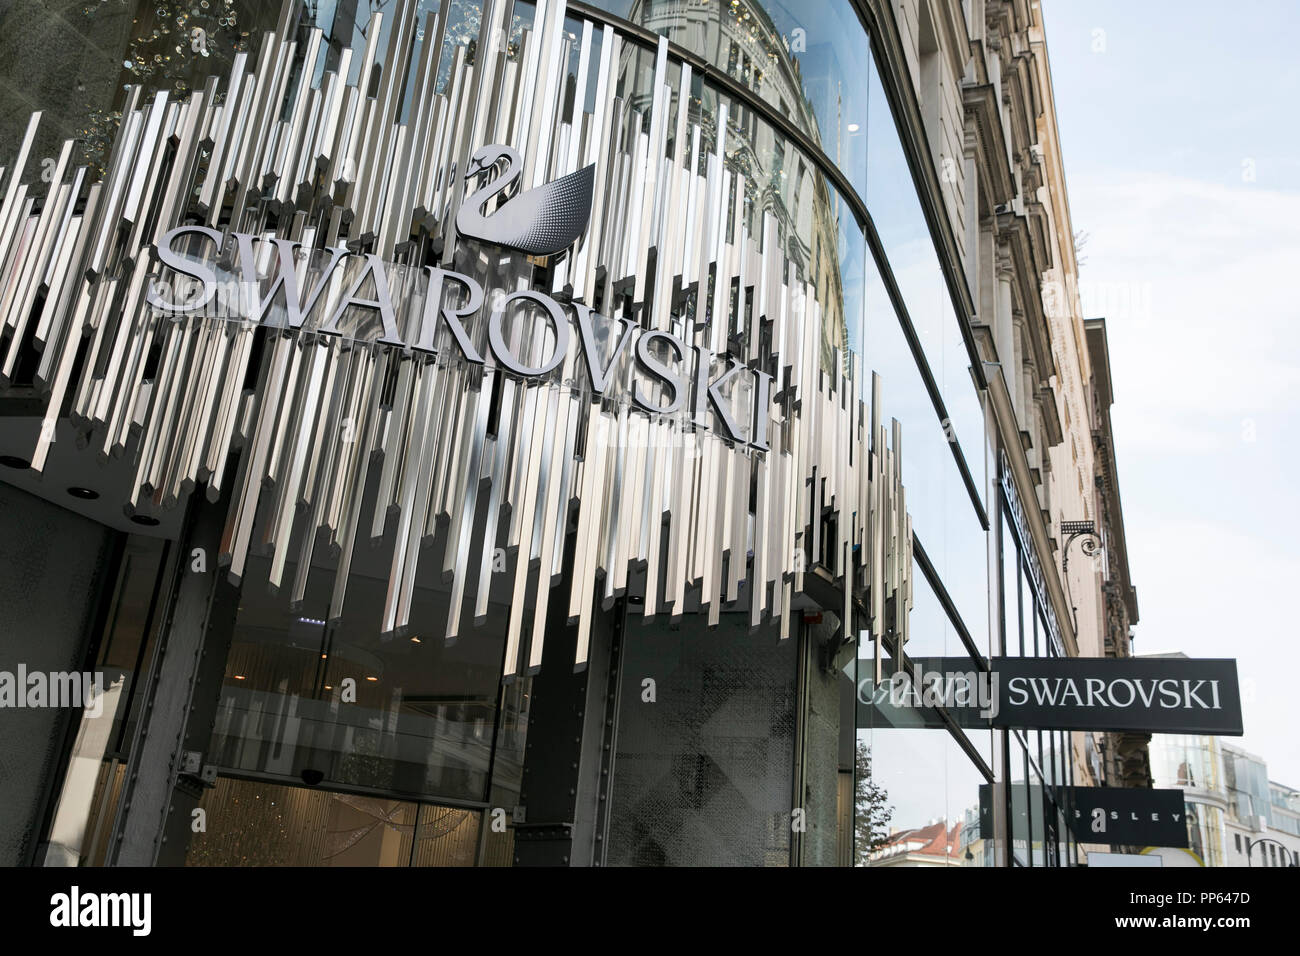 Swarovski Retail High Resolution Stock Photography and Images - Alamy